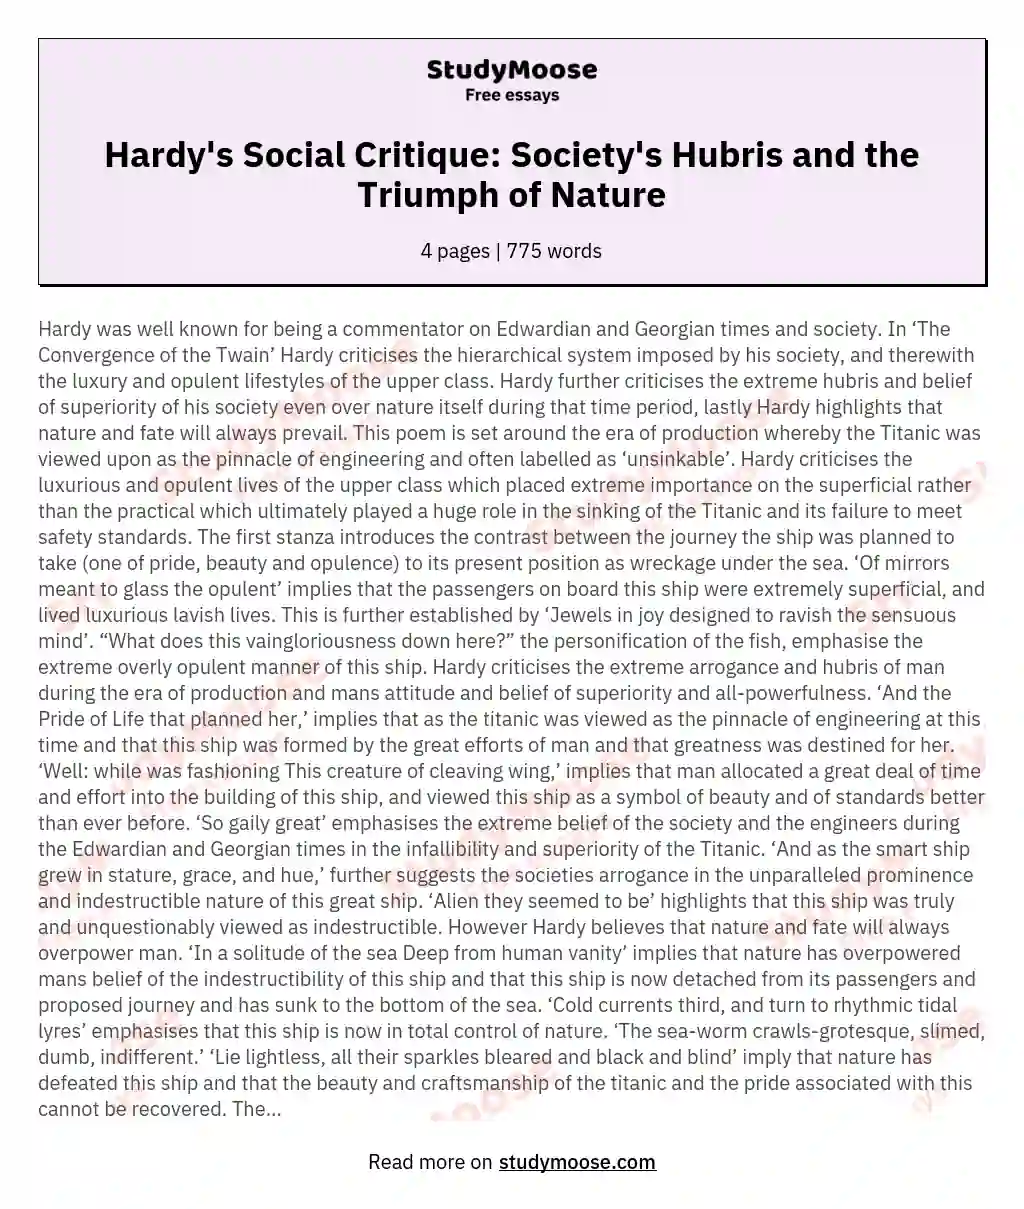 Hardy's Social Critique: Society's Hubris and the Triumph of Nature essay